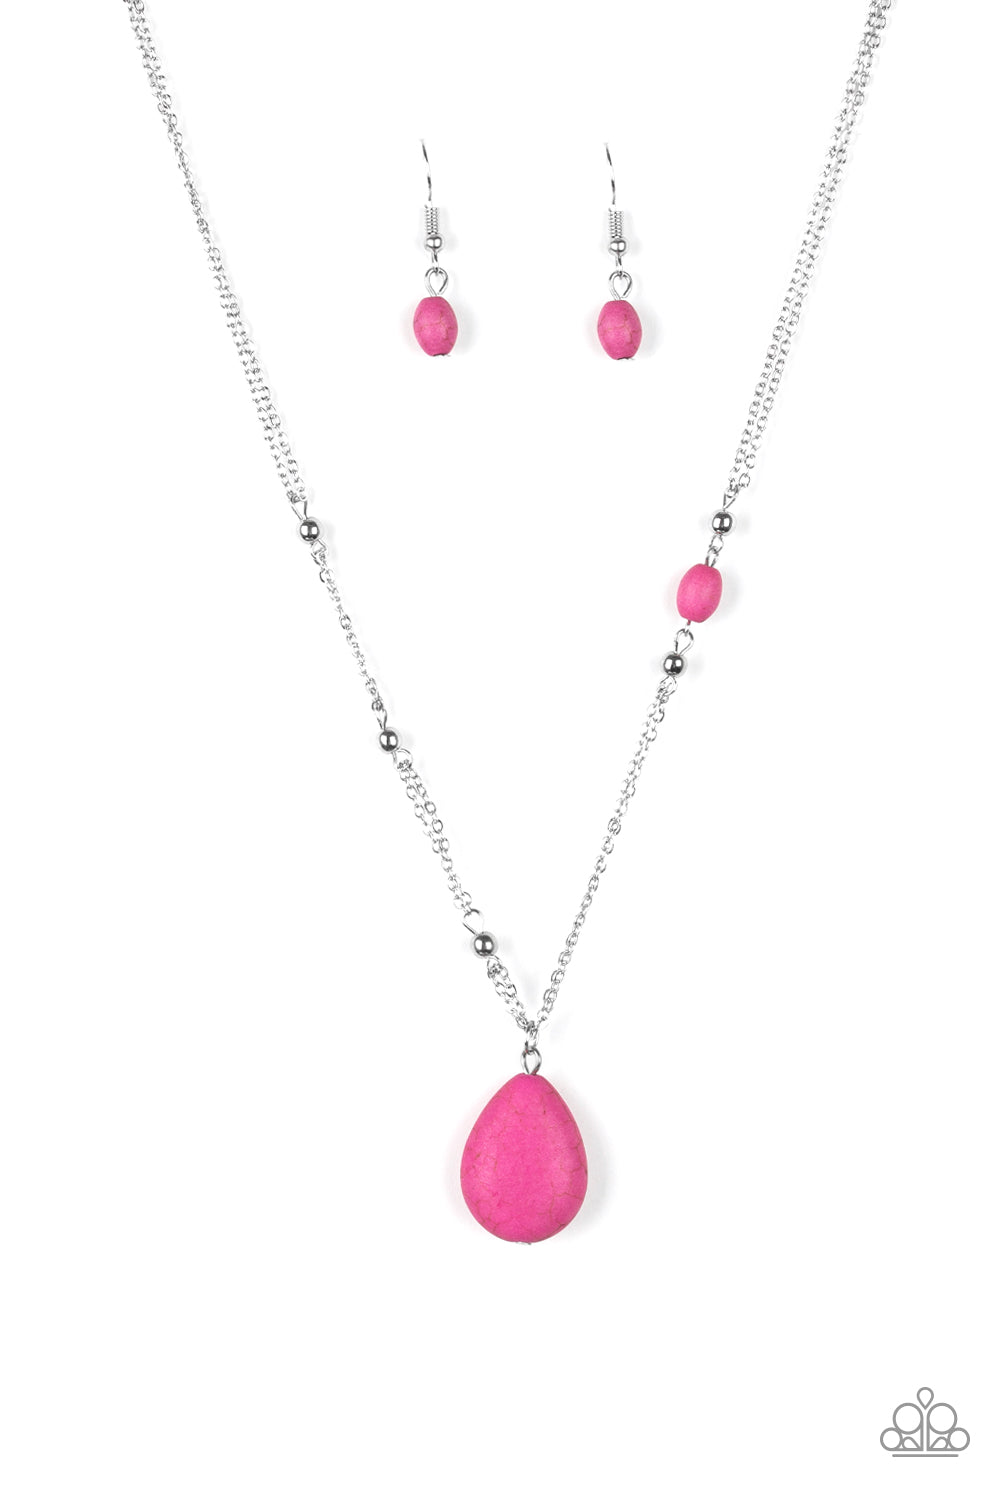 Peaceful Prairies - Pink Necklace - Paparazzi Accessories